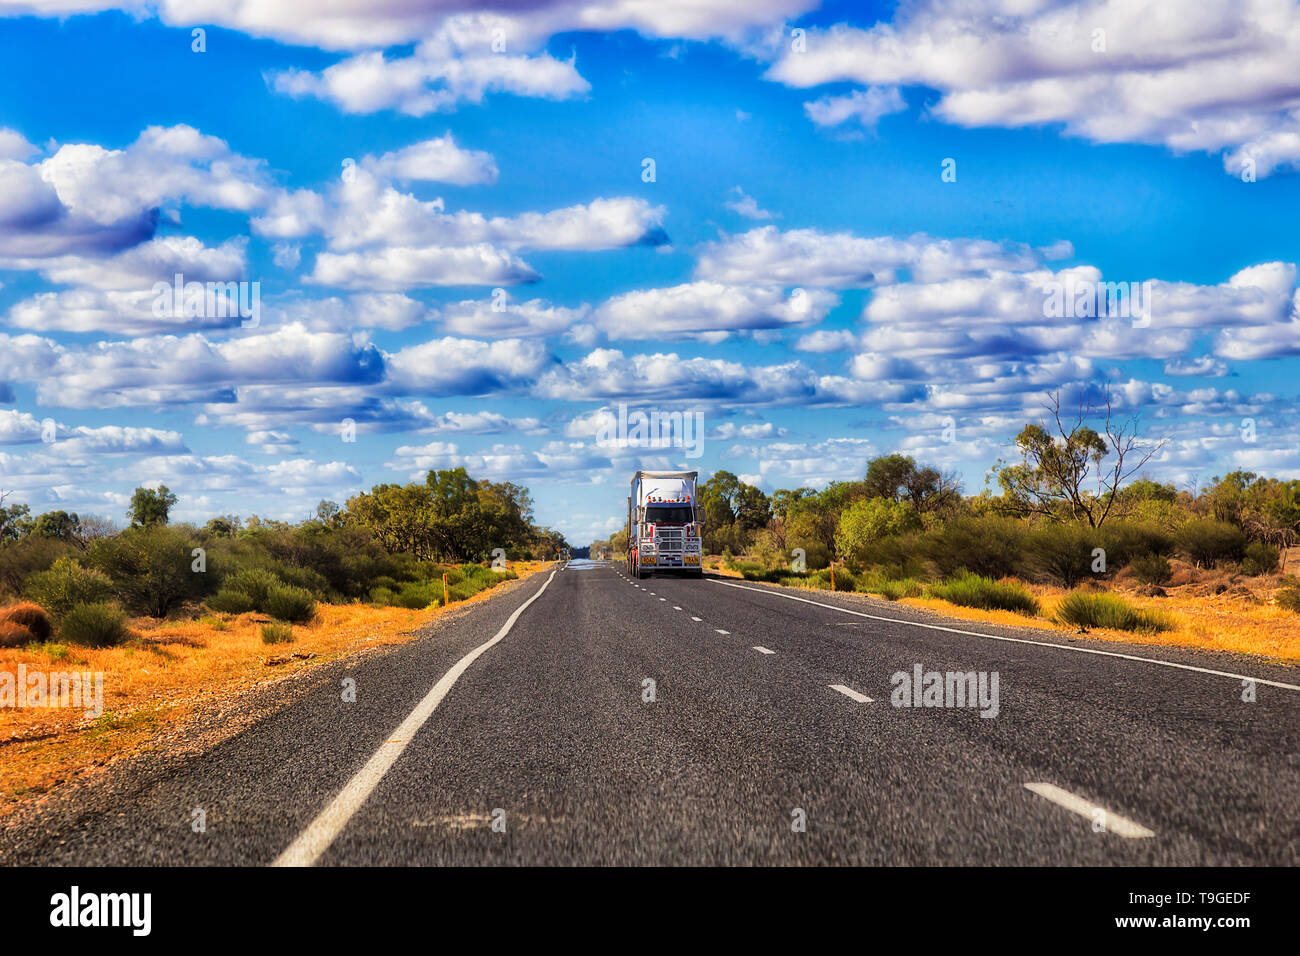 Remote empty road Castlereagh highway B55 in rural outback part of NSW, Australia with lonely distant road train truck transporting cargo shipment. Stock Photo